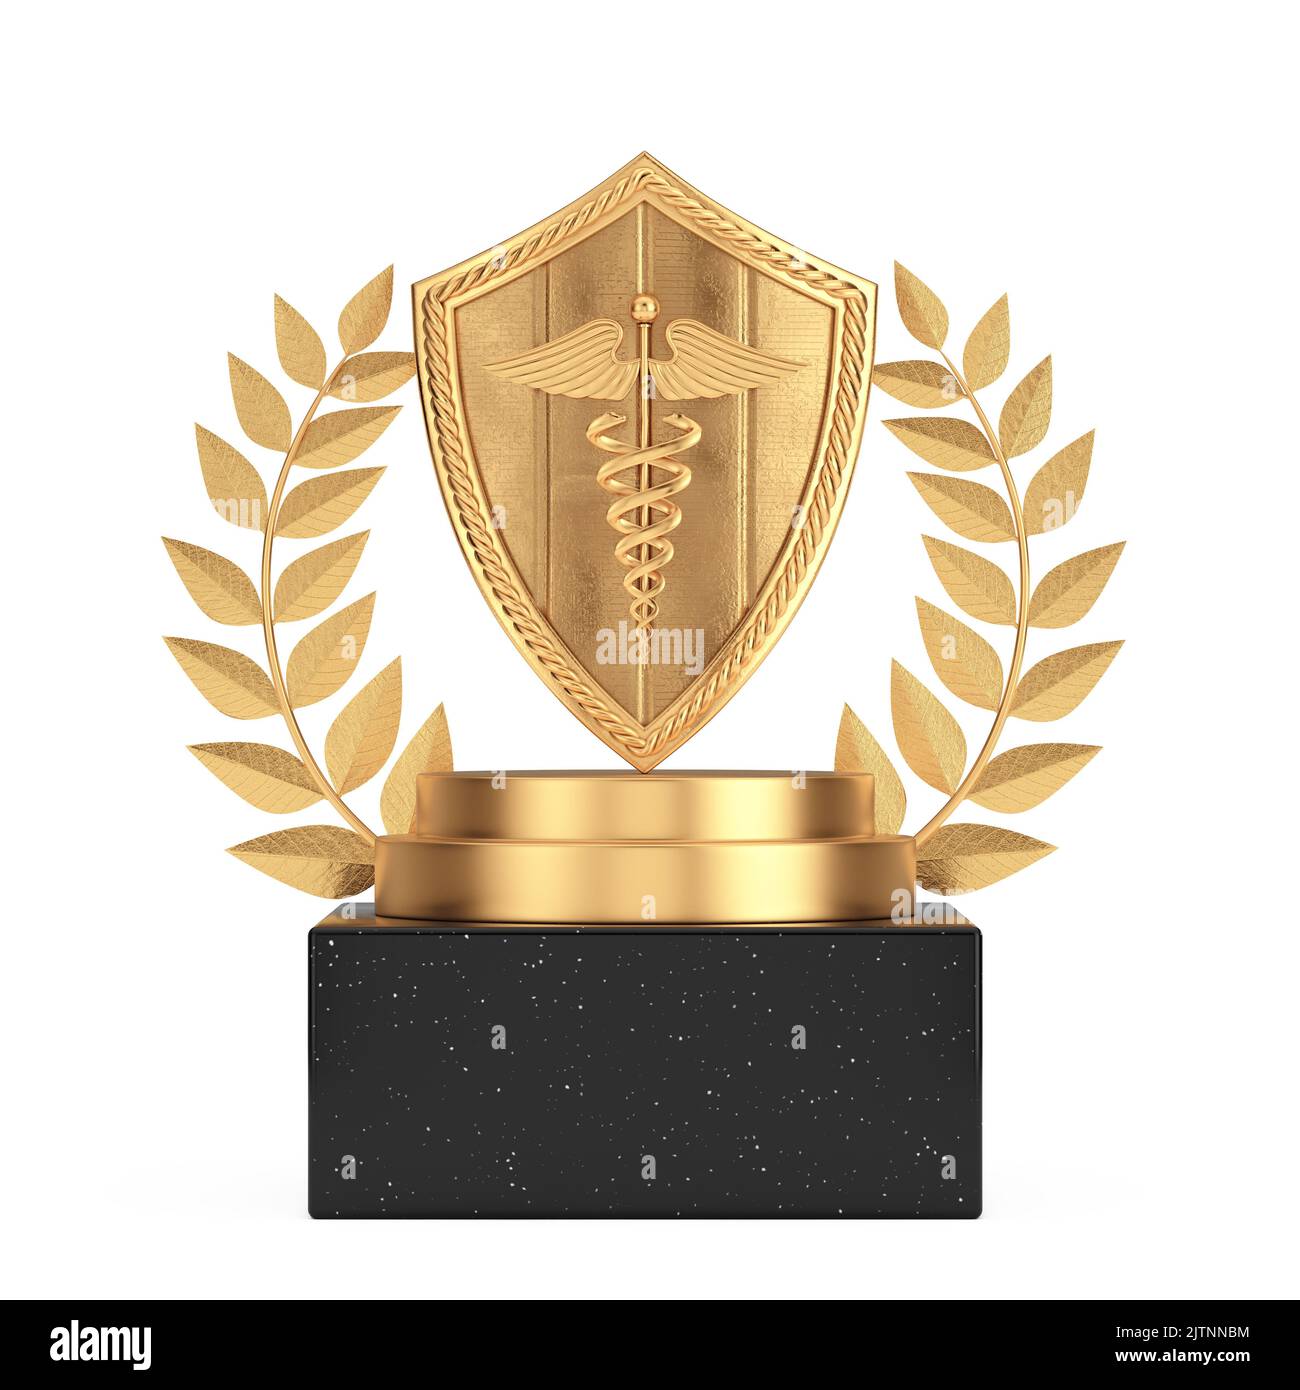 Winner Award Cube Gold Laurel Wreath Podium, Stage or Pedestal with Golden Medieval Viking Warrior Shield and Golden Medical Caduceus Symbol on a whit Stock Photo